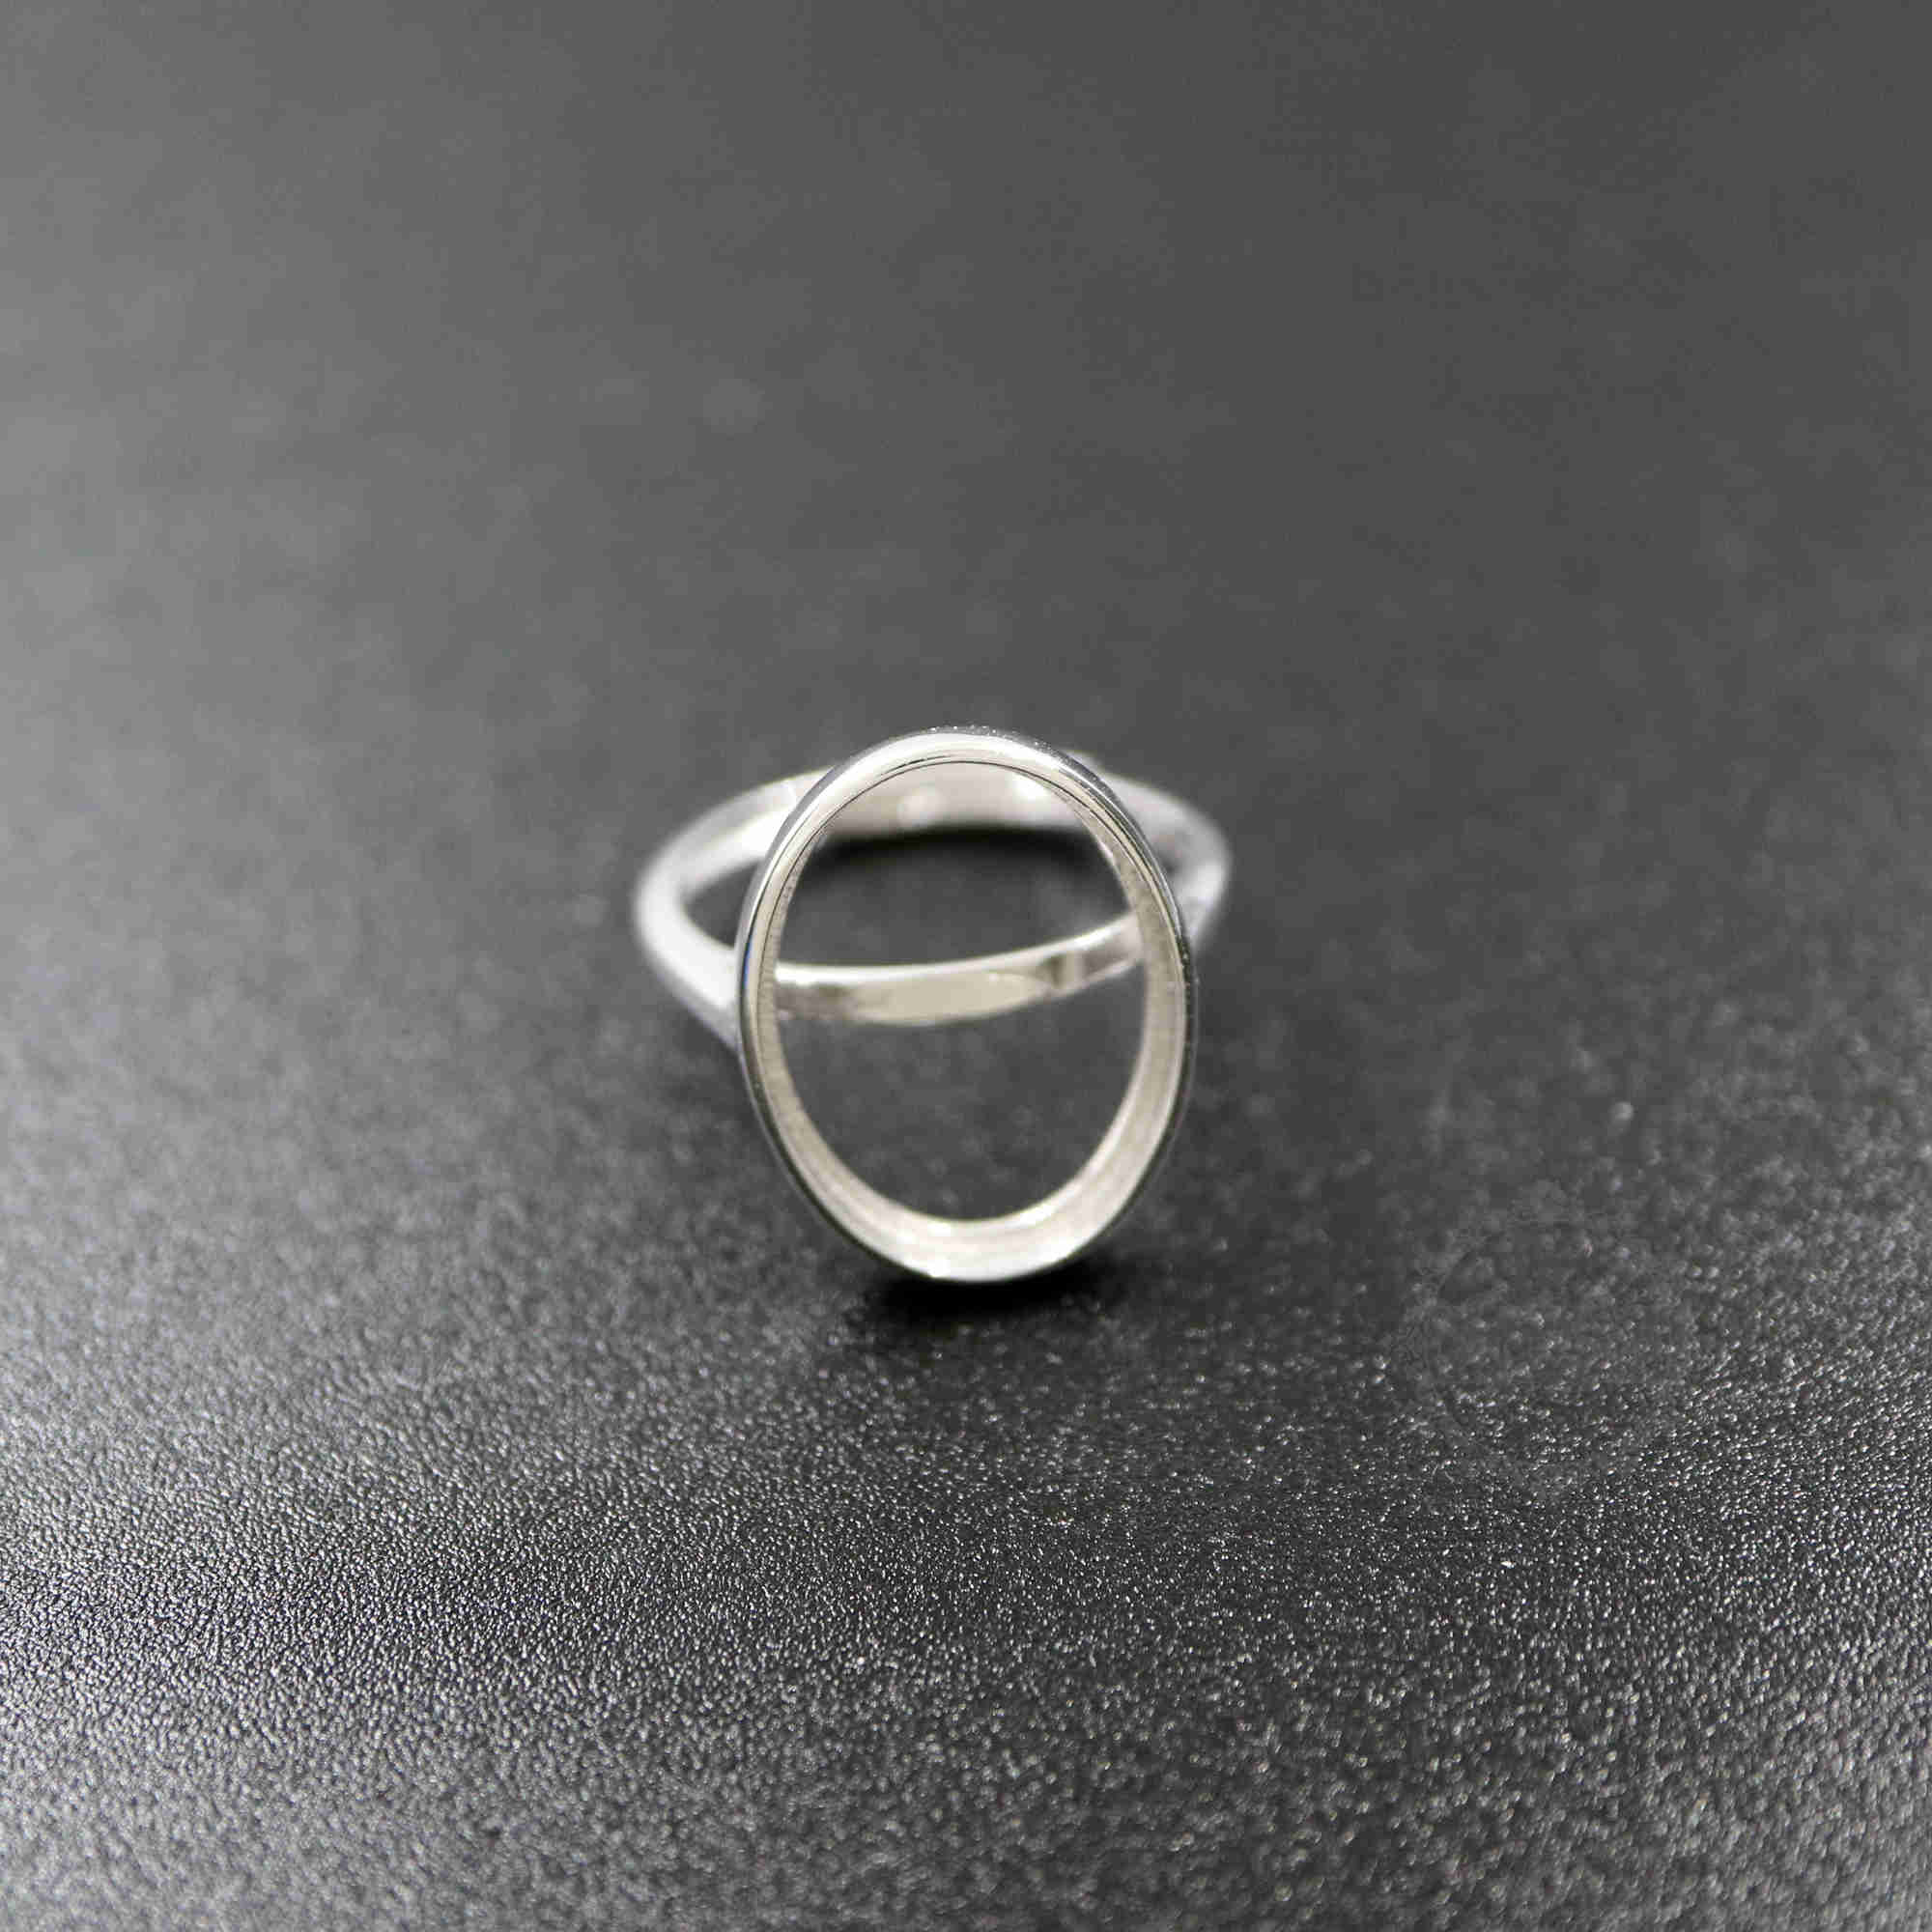 1Pcs oval simple frame setting elegant 925 sterling silver bezel tray rose gold plated adjustable ring settings 1222012 - Click Image to Close